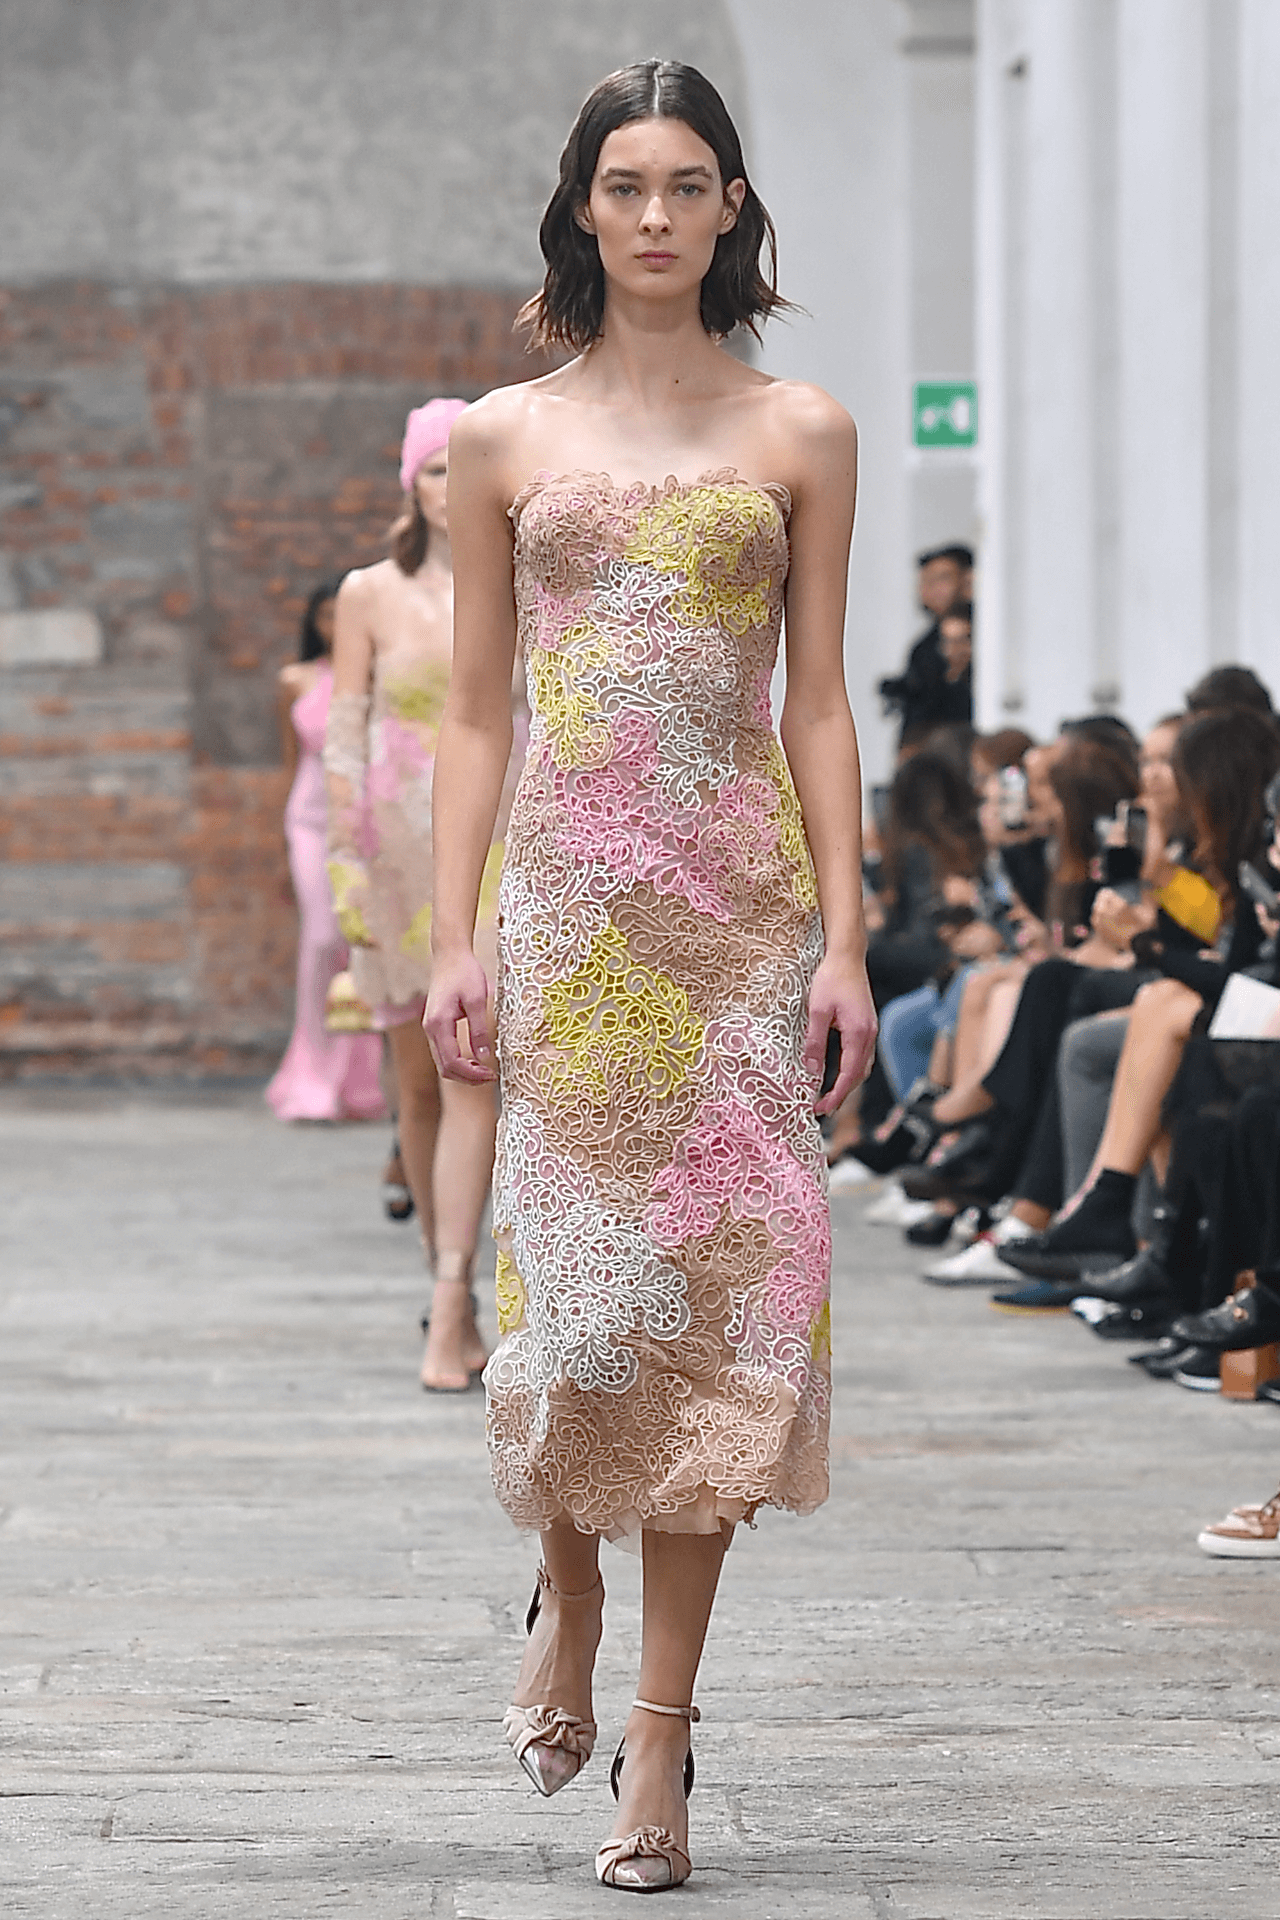 A Preview of Spring - Highlights from the Ermanno Scervino Spring Summer 2023 Show